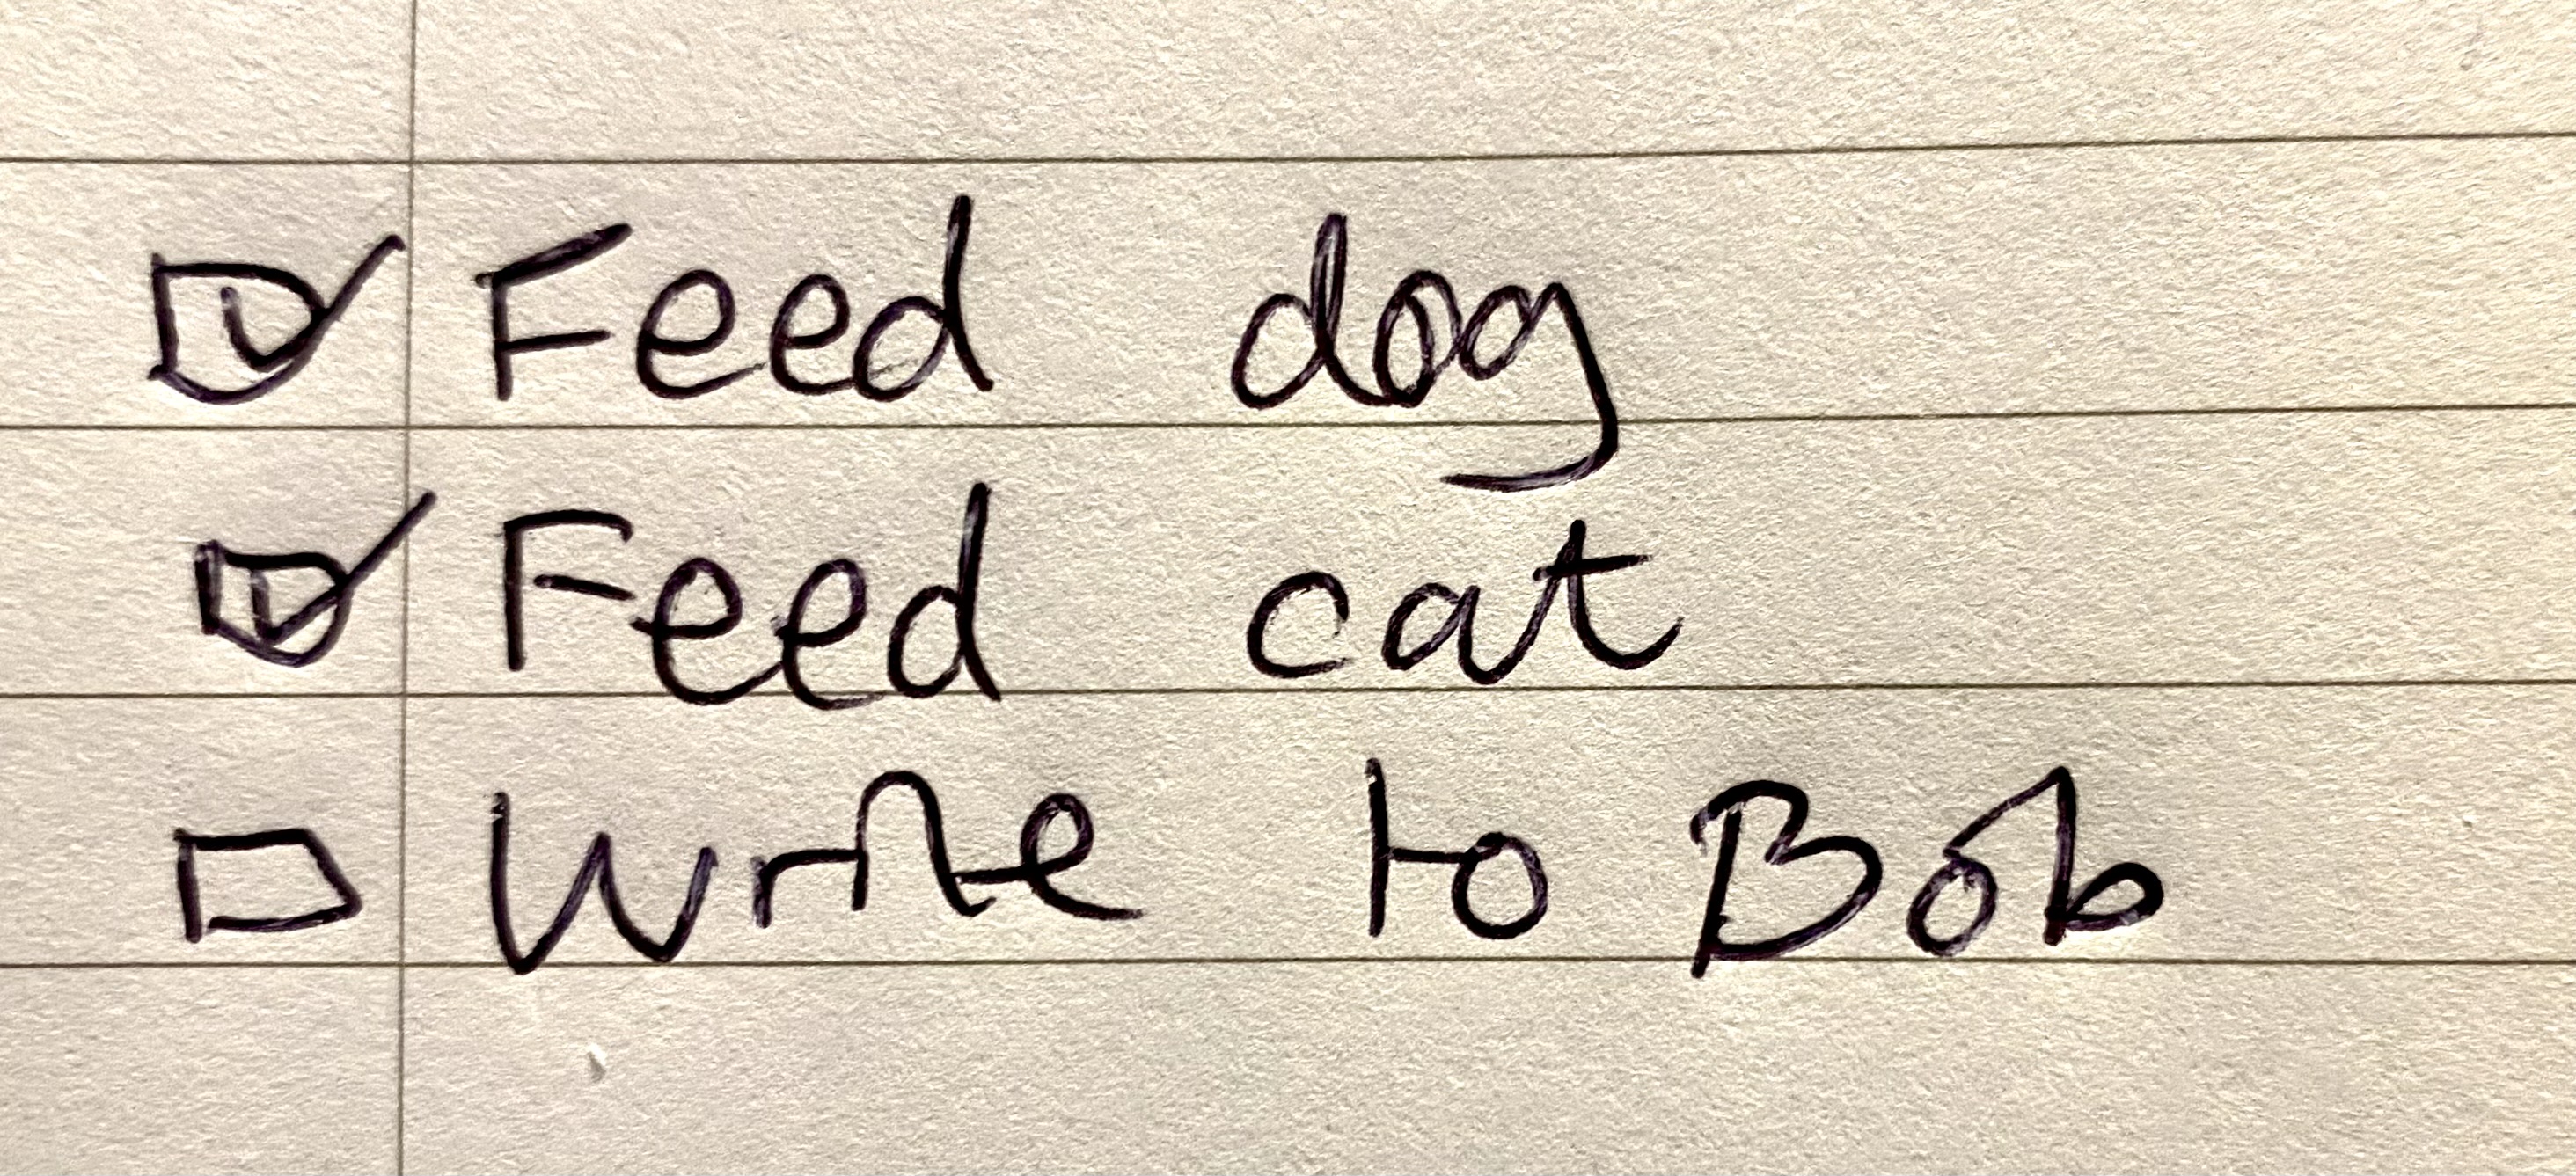 Hand-written TO-DO list with 'Feed dog', 'Feed cat', 'Write to Bob'